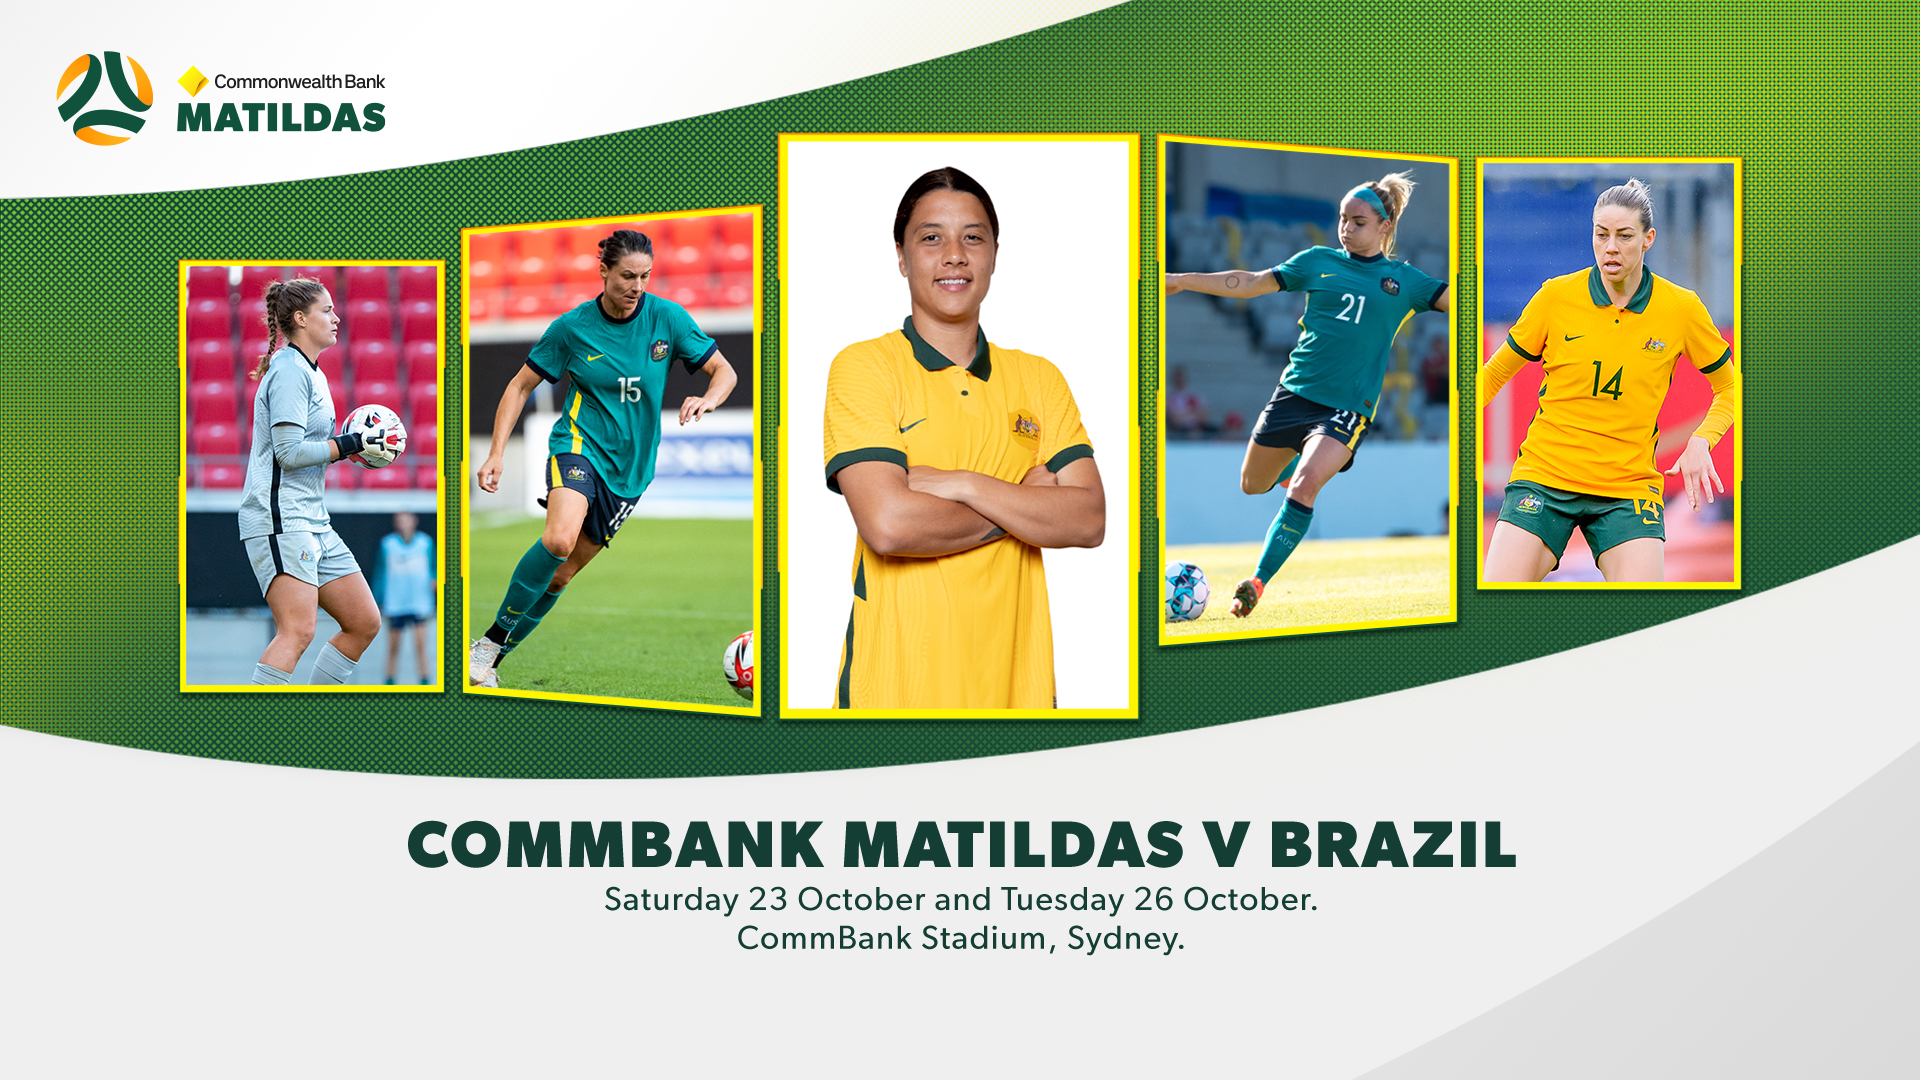 The Commonwealth Bank Matildas to headline return of major events to NSW in October